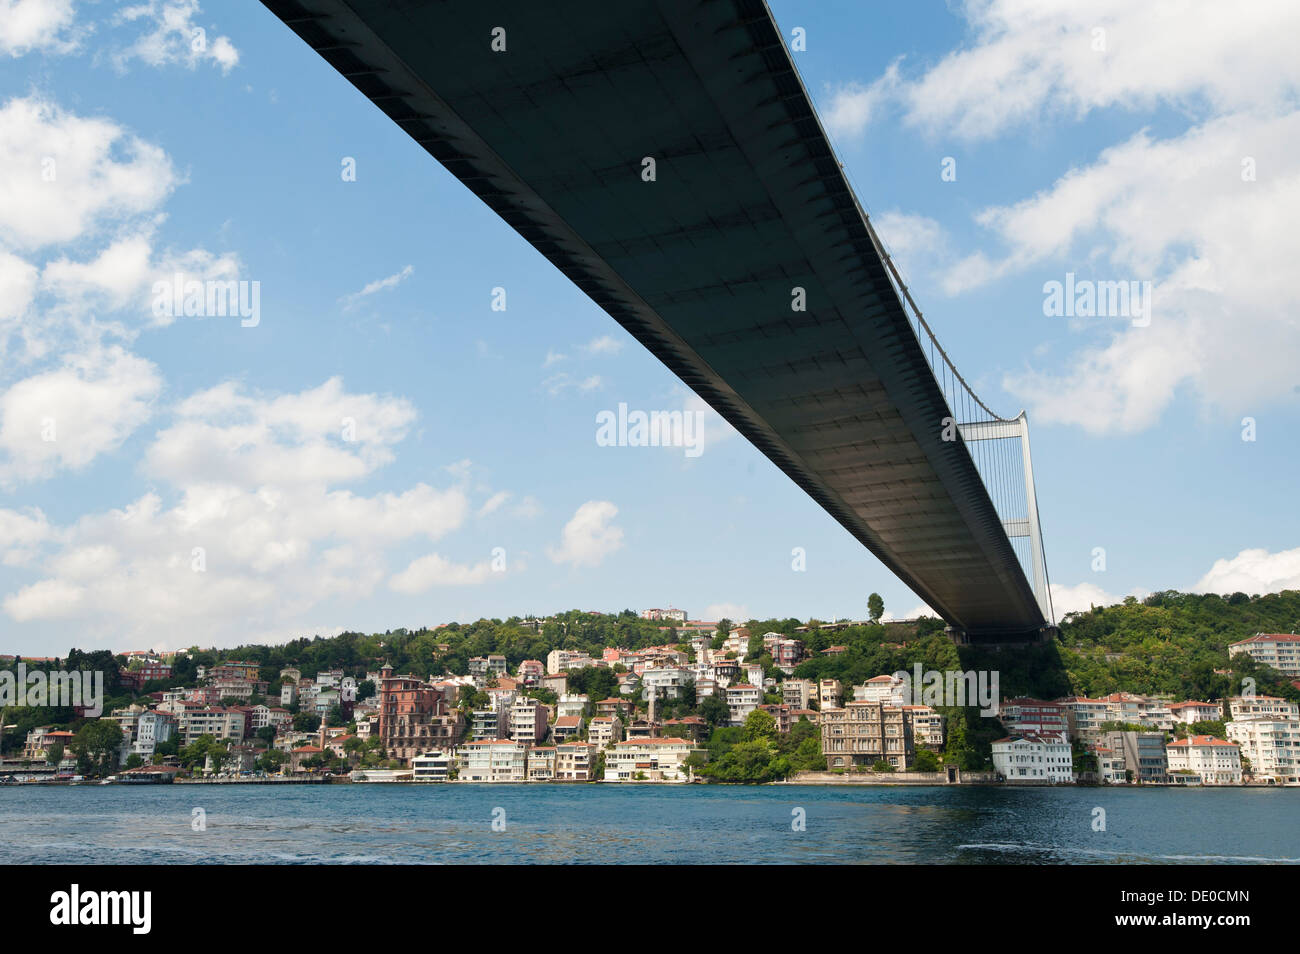 Large suspension road bridge over a river against a blue sky background with residences underneath Stock Photo